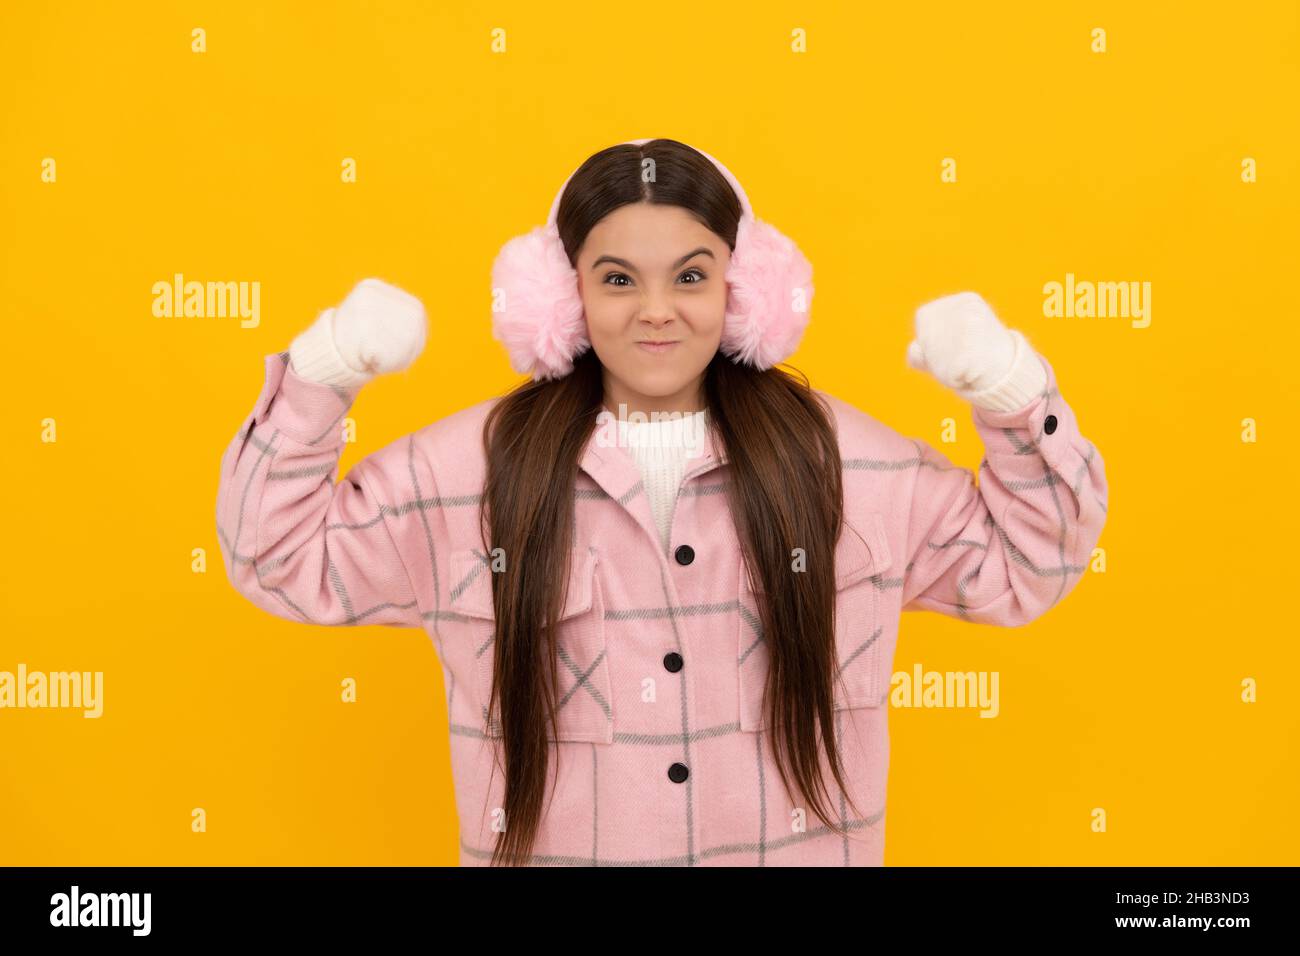 express emotion. winter fashion. angry kid in fur earmuffs showing fists. Stock Photo